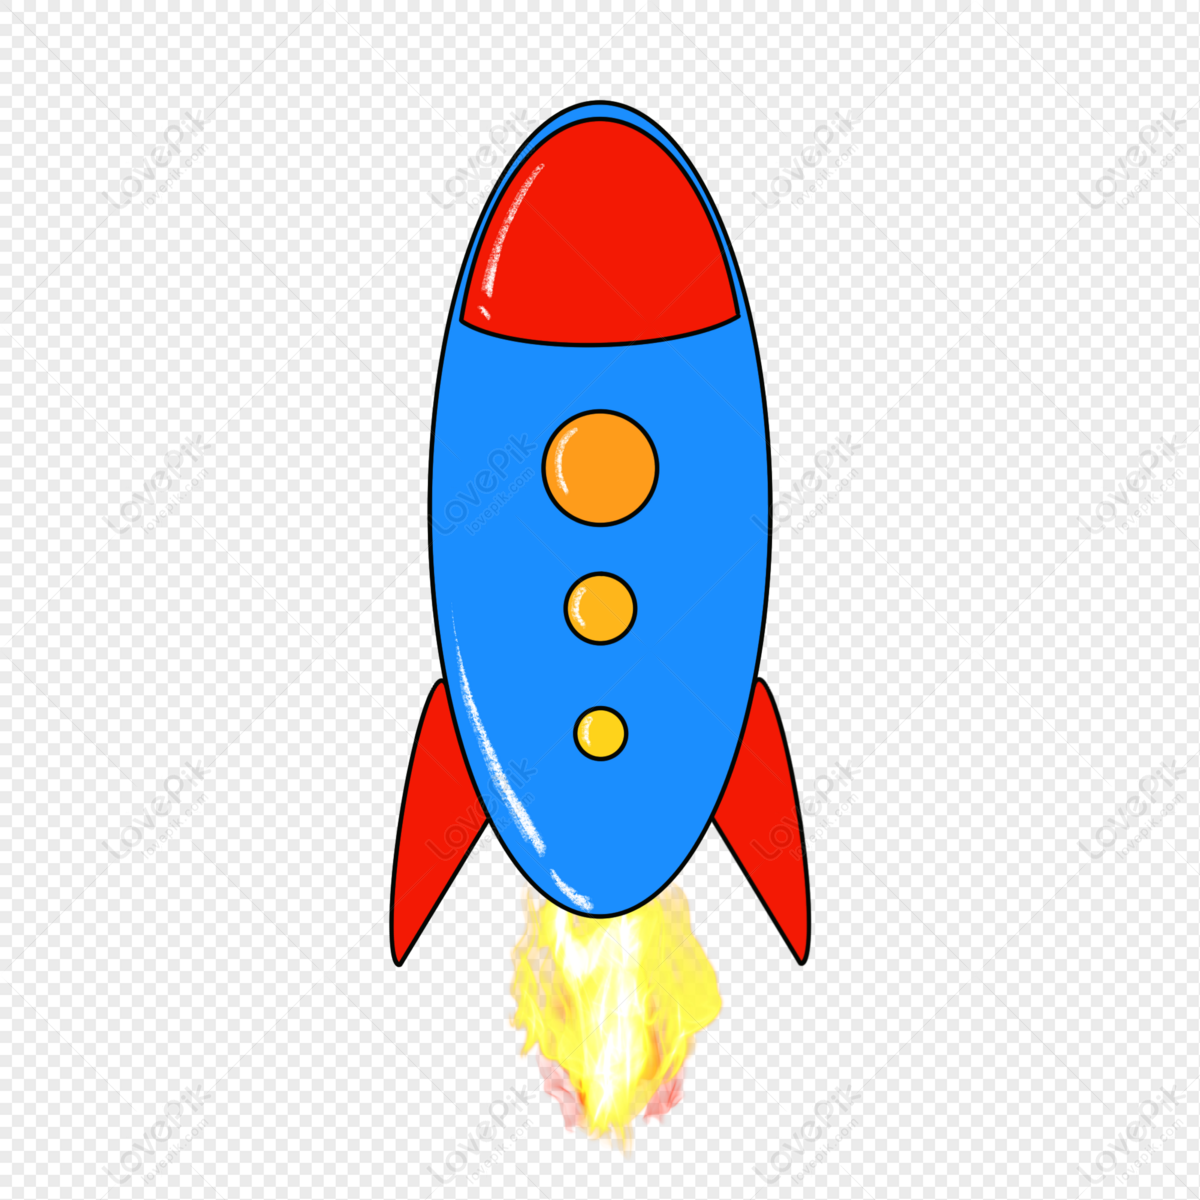 Cartoon Rocket Free PNG And Clipart Image For Free Download - Lovepik |  401452139